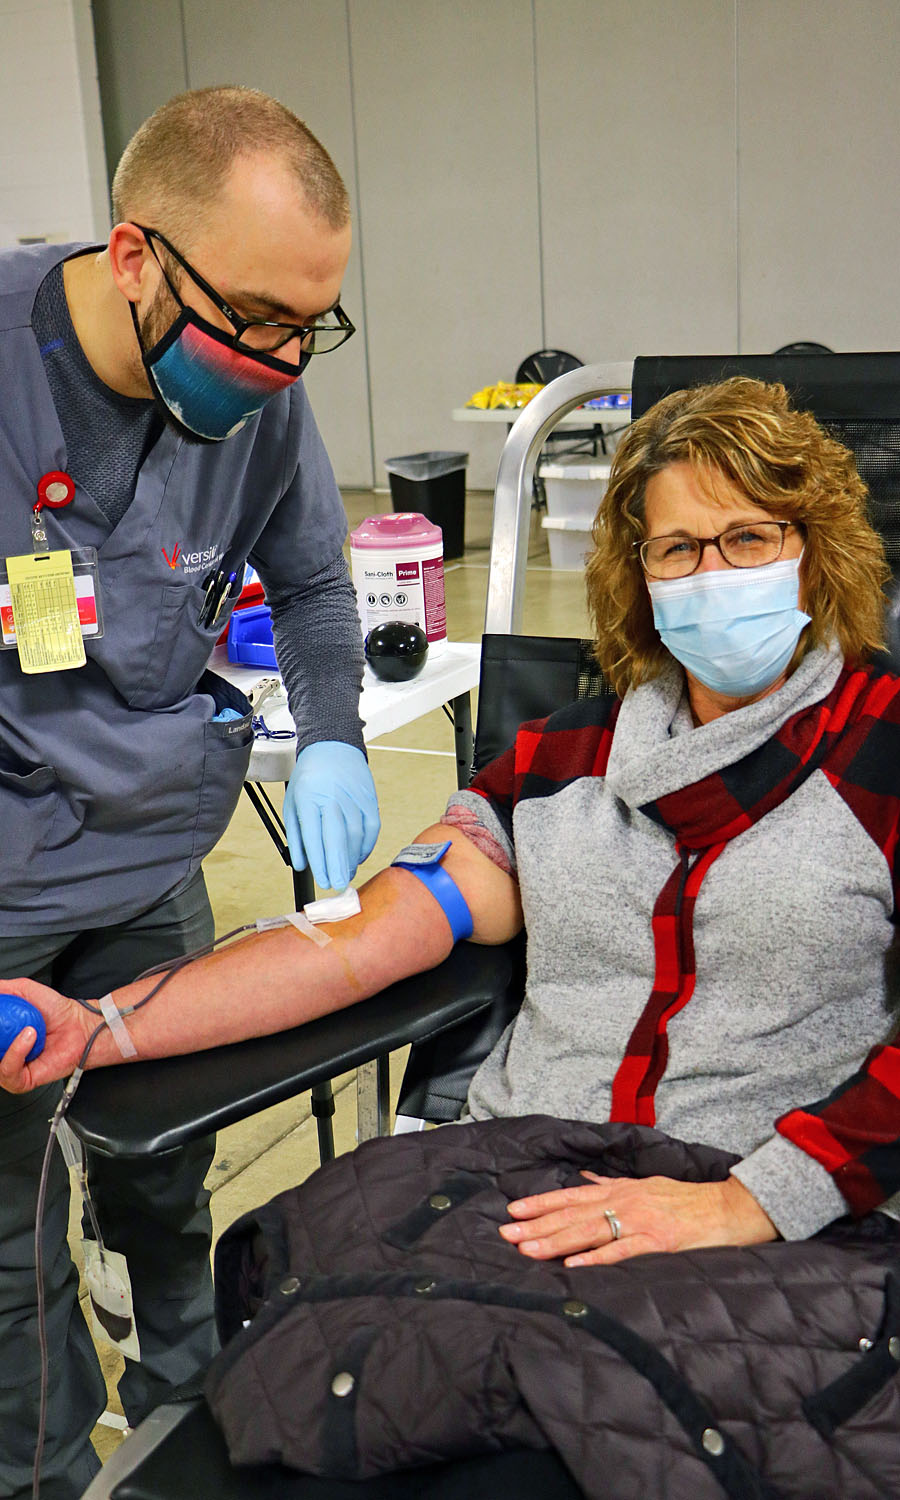 A Tomah resident donates blood at a blood drive. She and the nurse are masked.